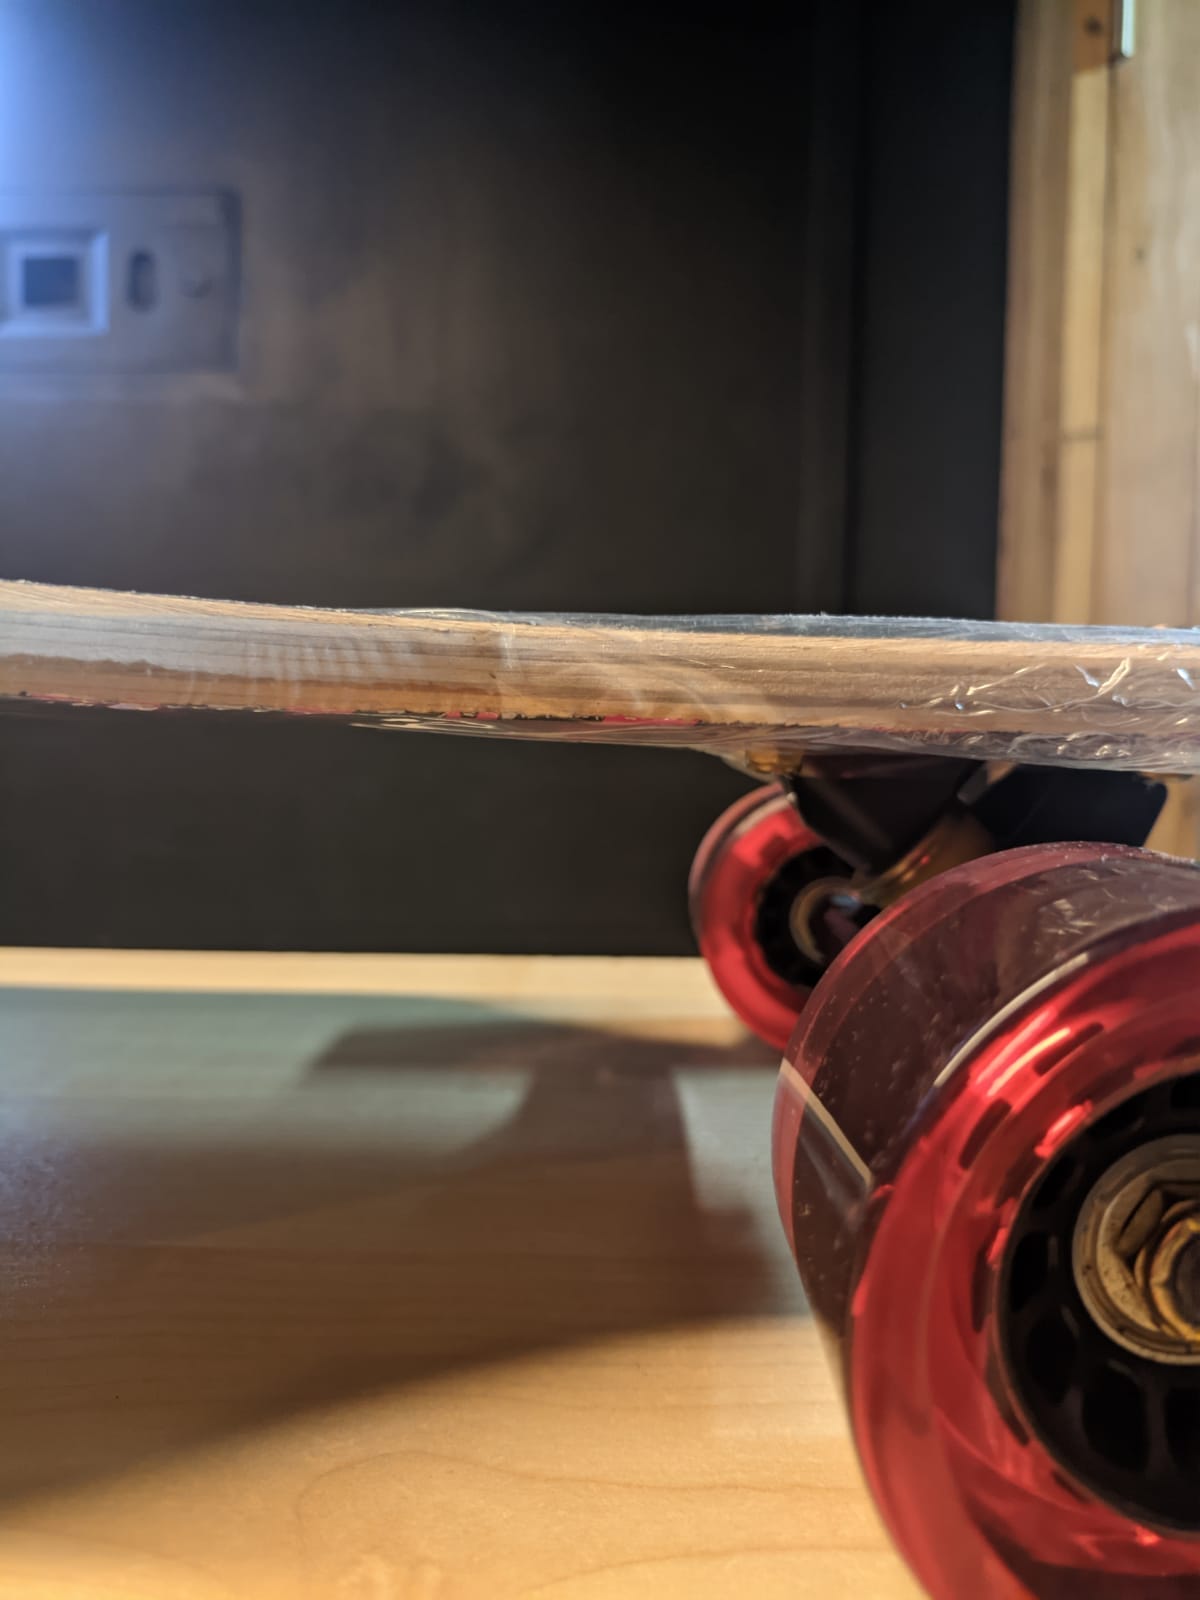 When selecting a longboard, consider the brand's reputation as well. Select a reputable brand with a track record of producing high-quality boards.